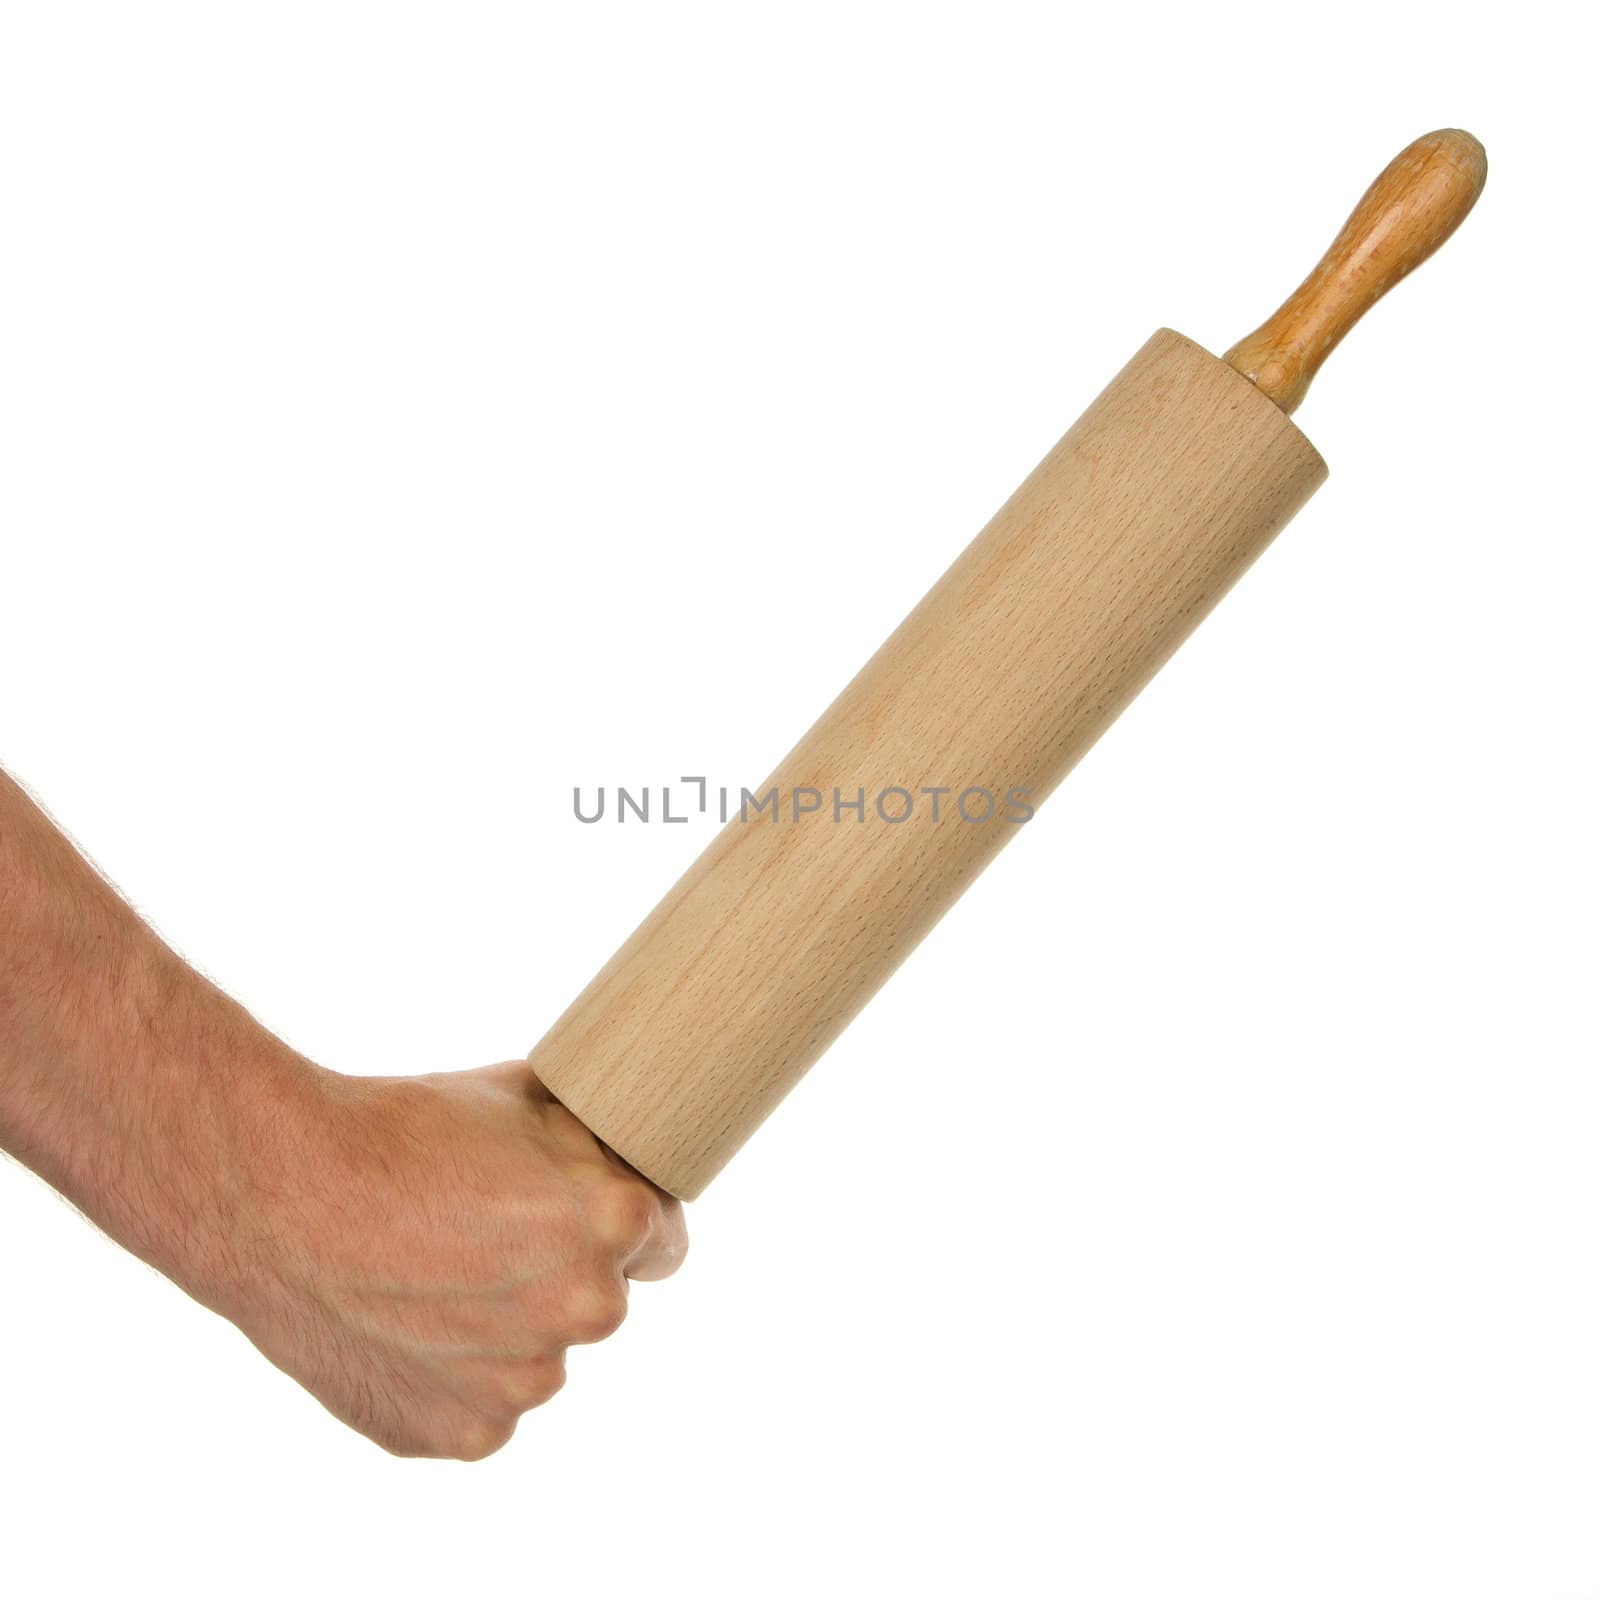 Hand with rolling-pin, isolated on a white background